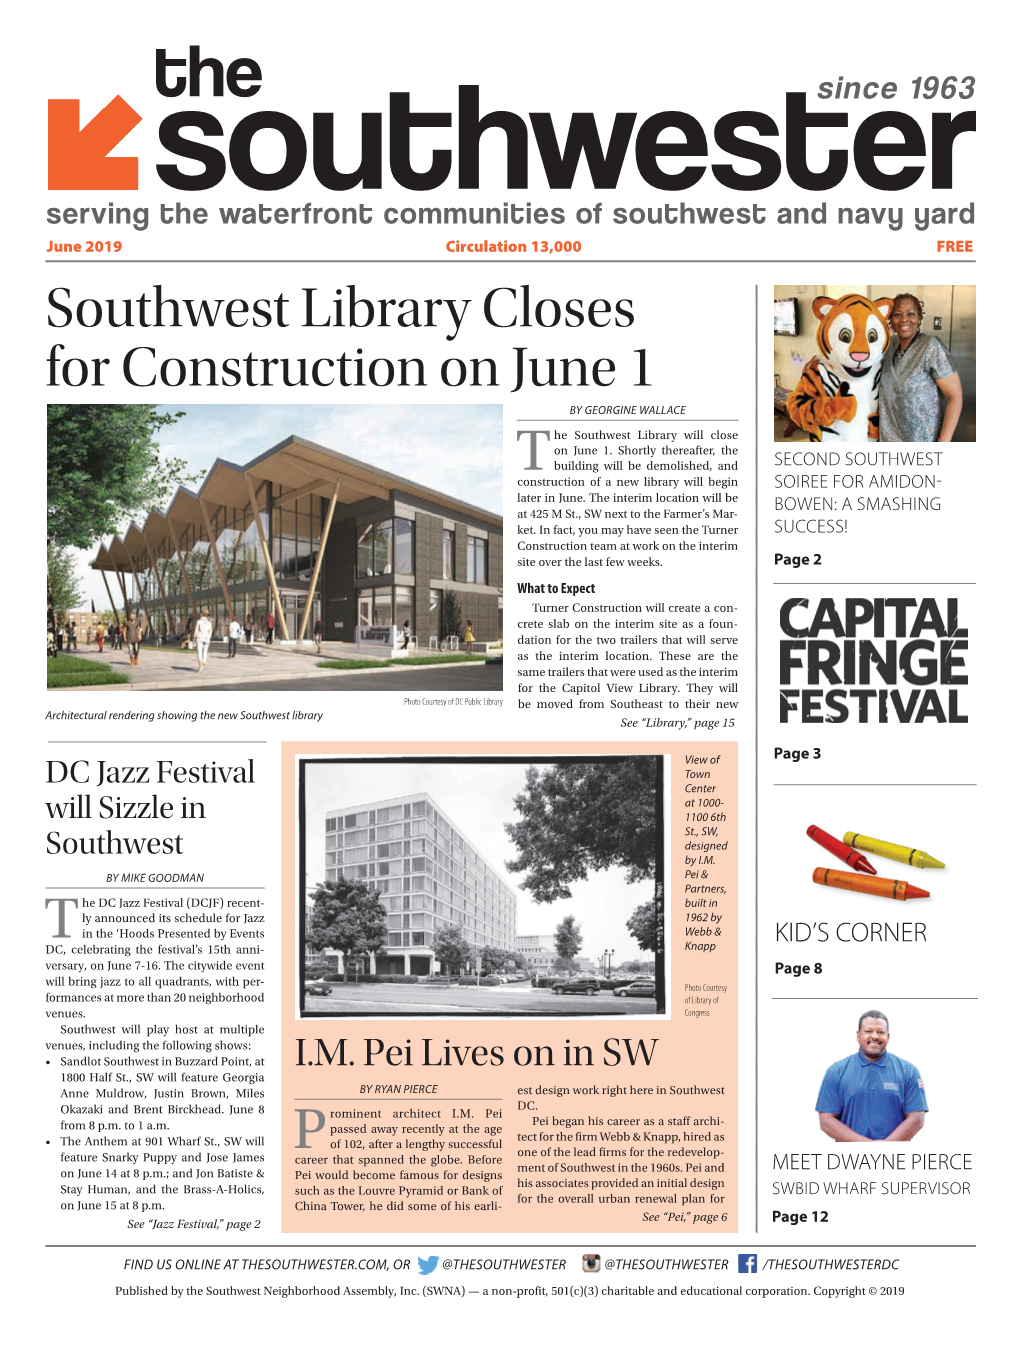 Southwest Library Closes for Construction on June 1 by GEORGINE WALLACE